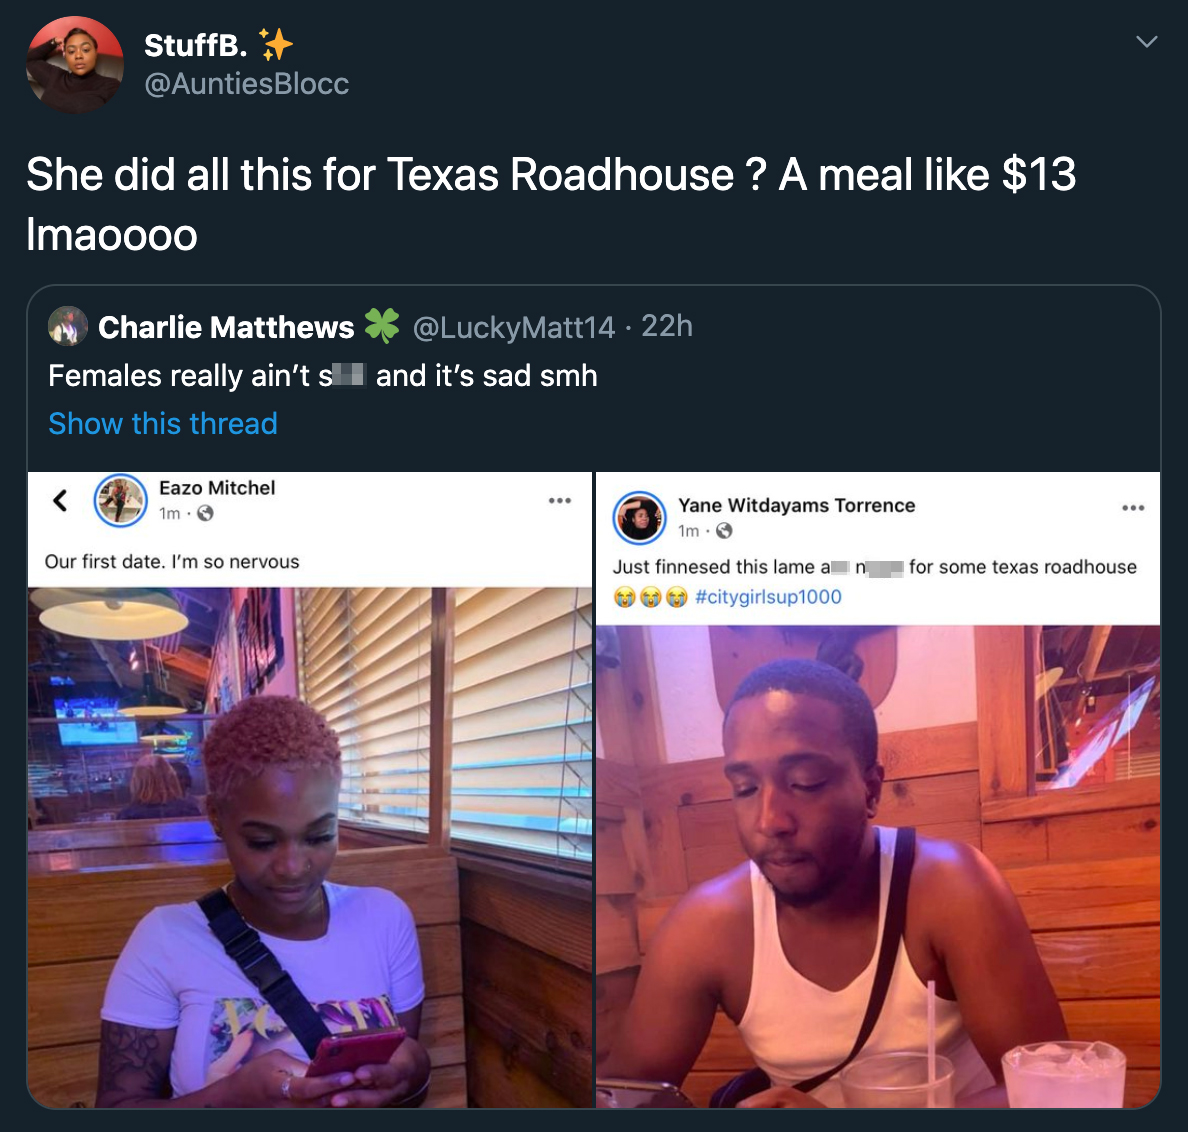 She did all this for Texas Roadhouse? A meal $13 Imaoooo Charlie Matthews 22h Females really ain't s 1 and it's sad smh Show this thread Eazo Mitchel Im Yane Witdayams Torrence Our first date. I'm so nervous Just finnesed this lame for som